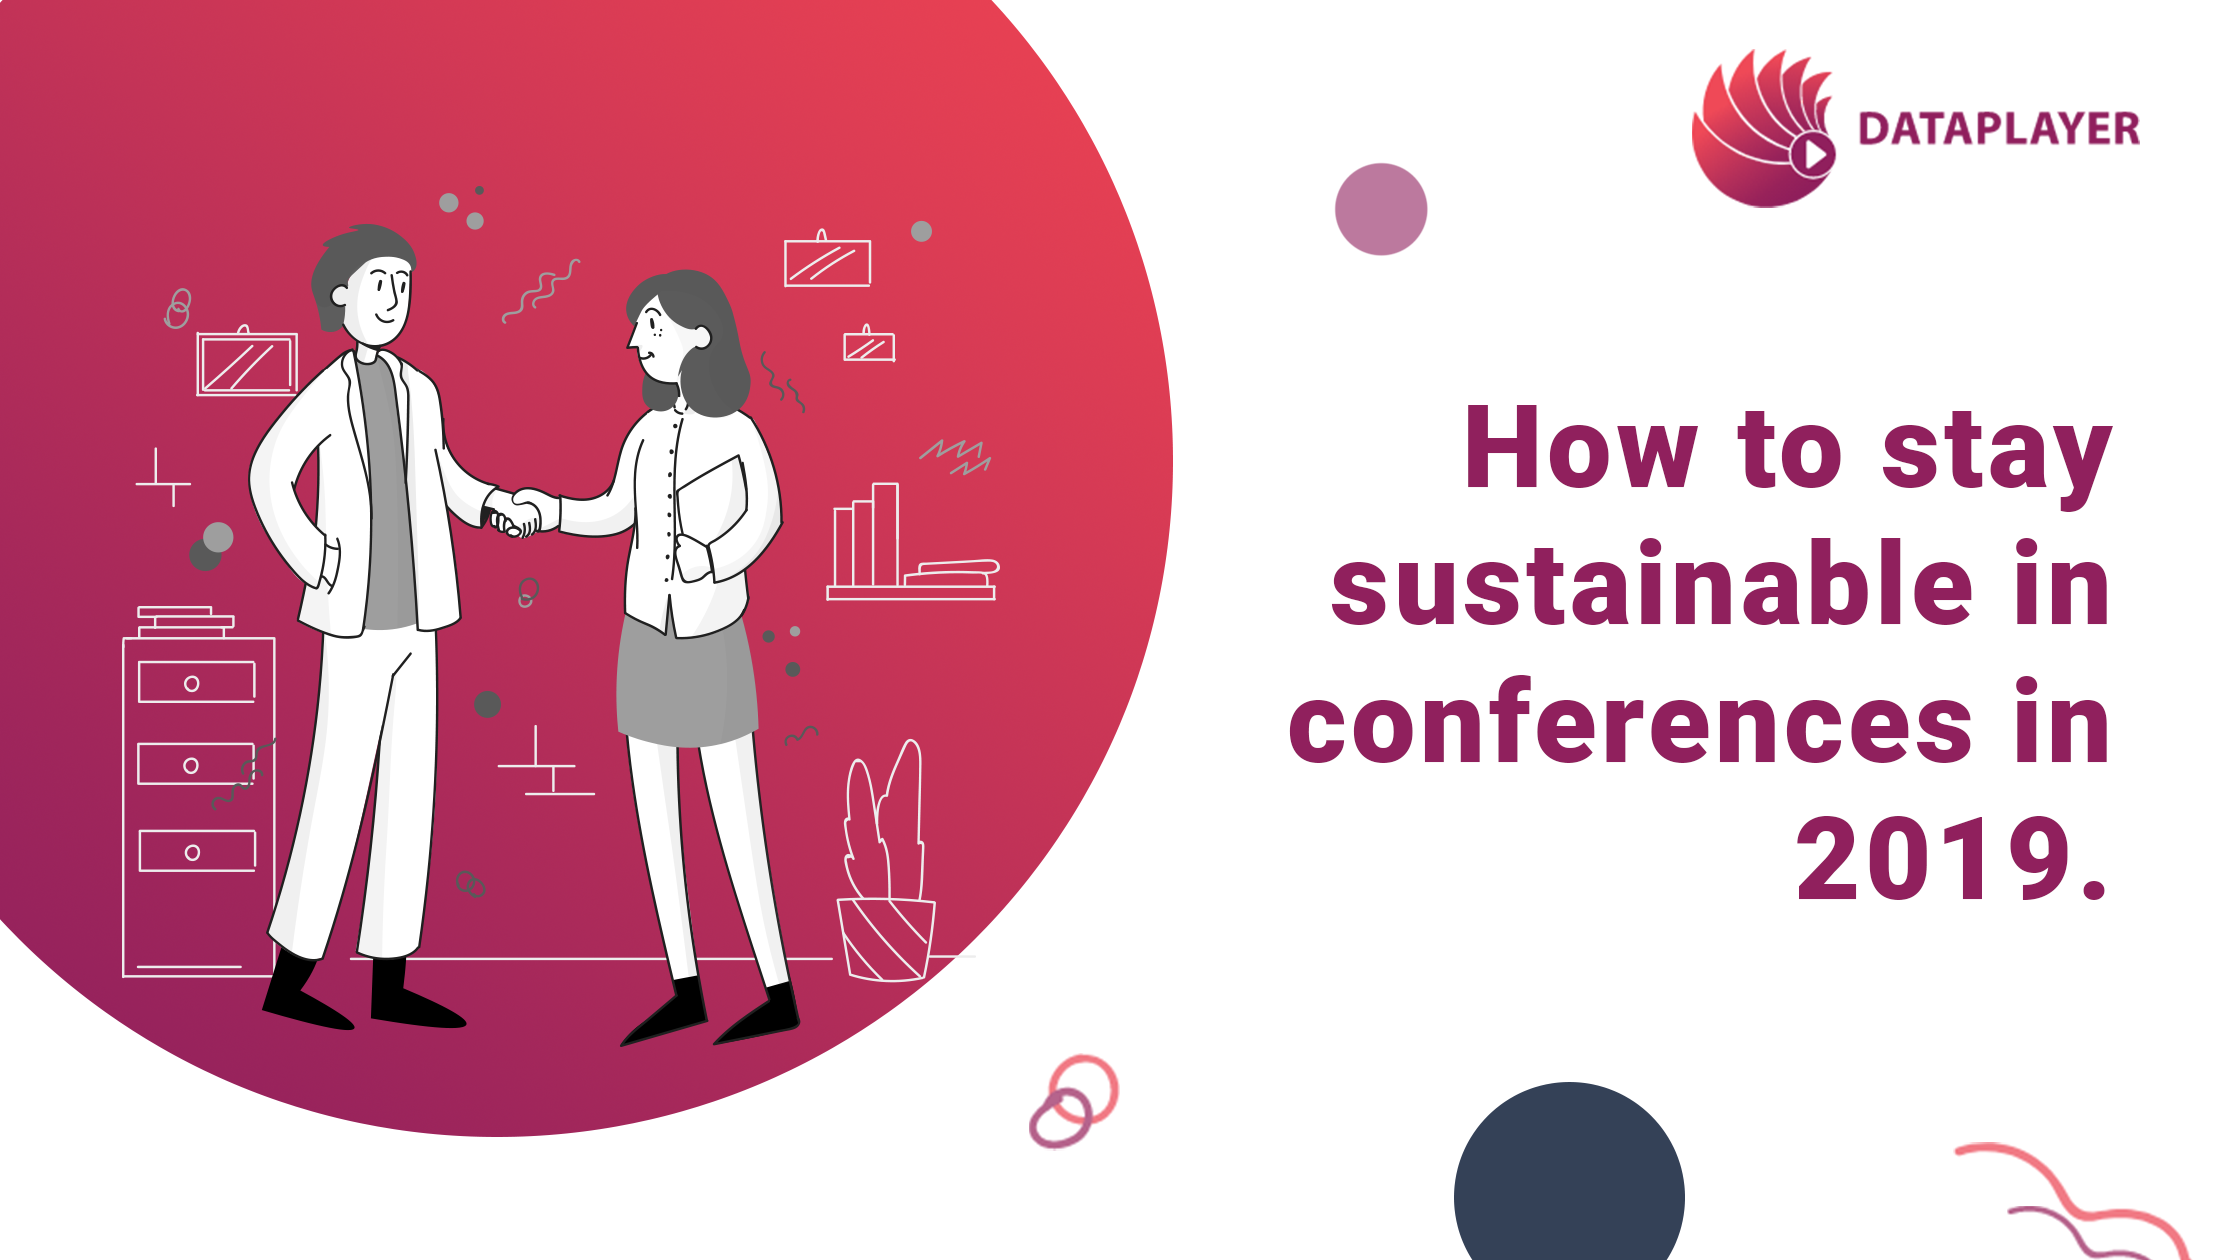 How to stay sustainable in conferences in 2019.